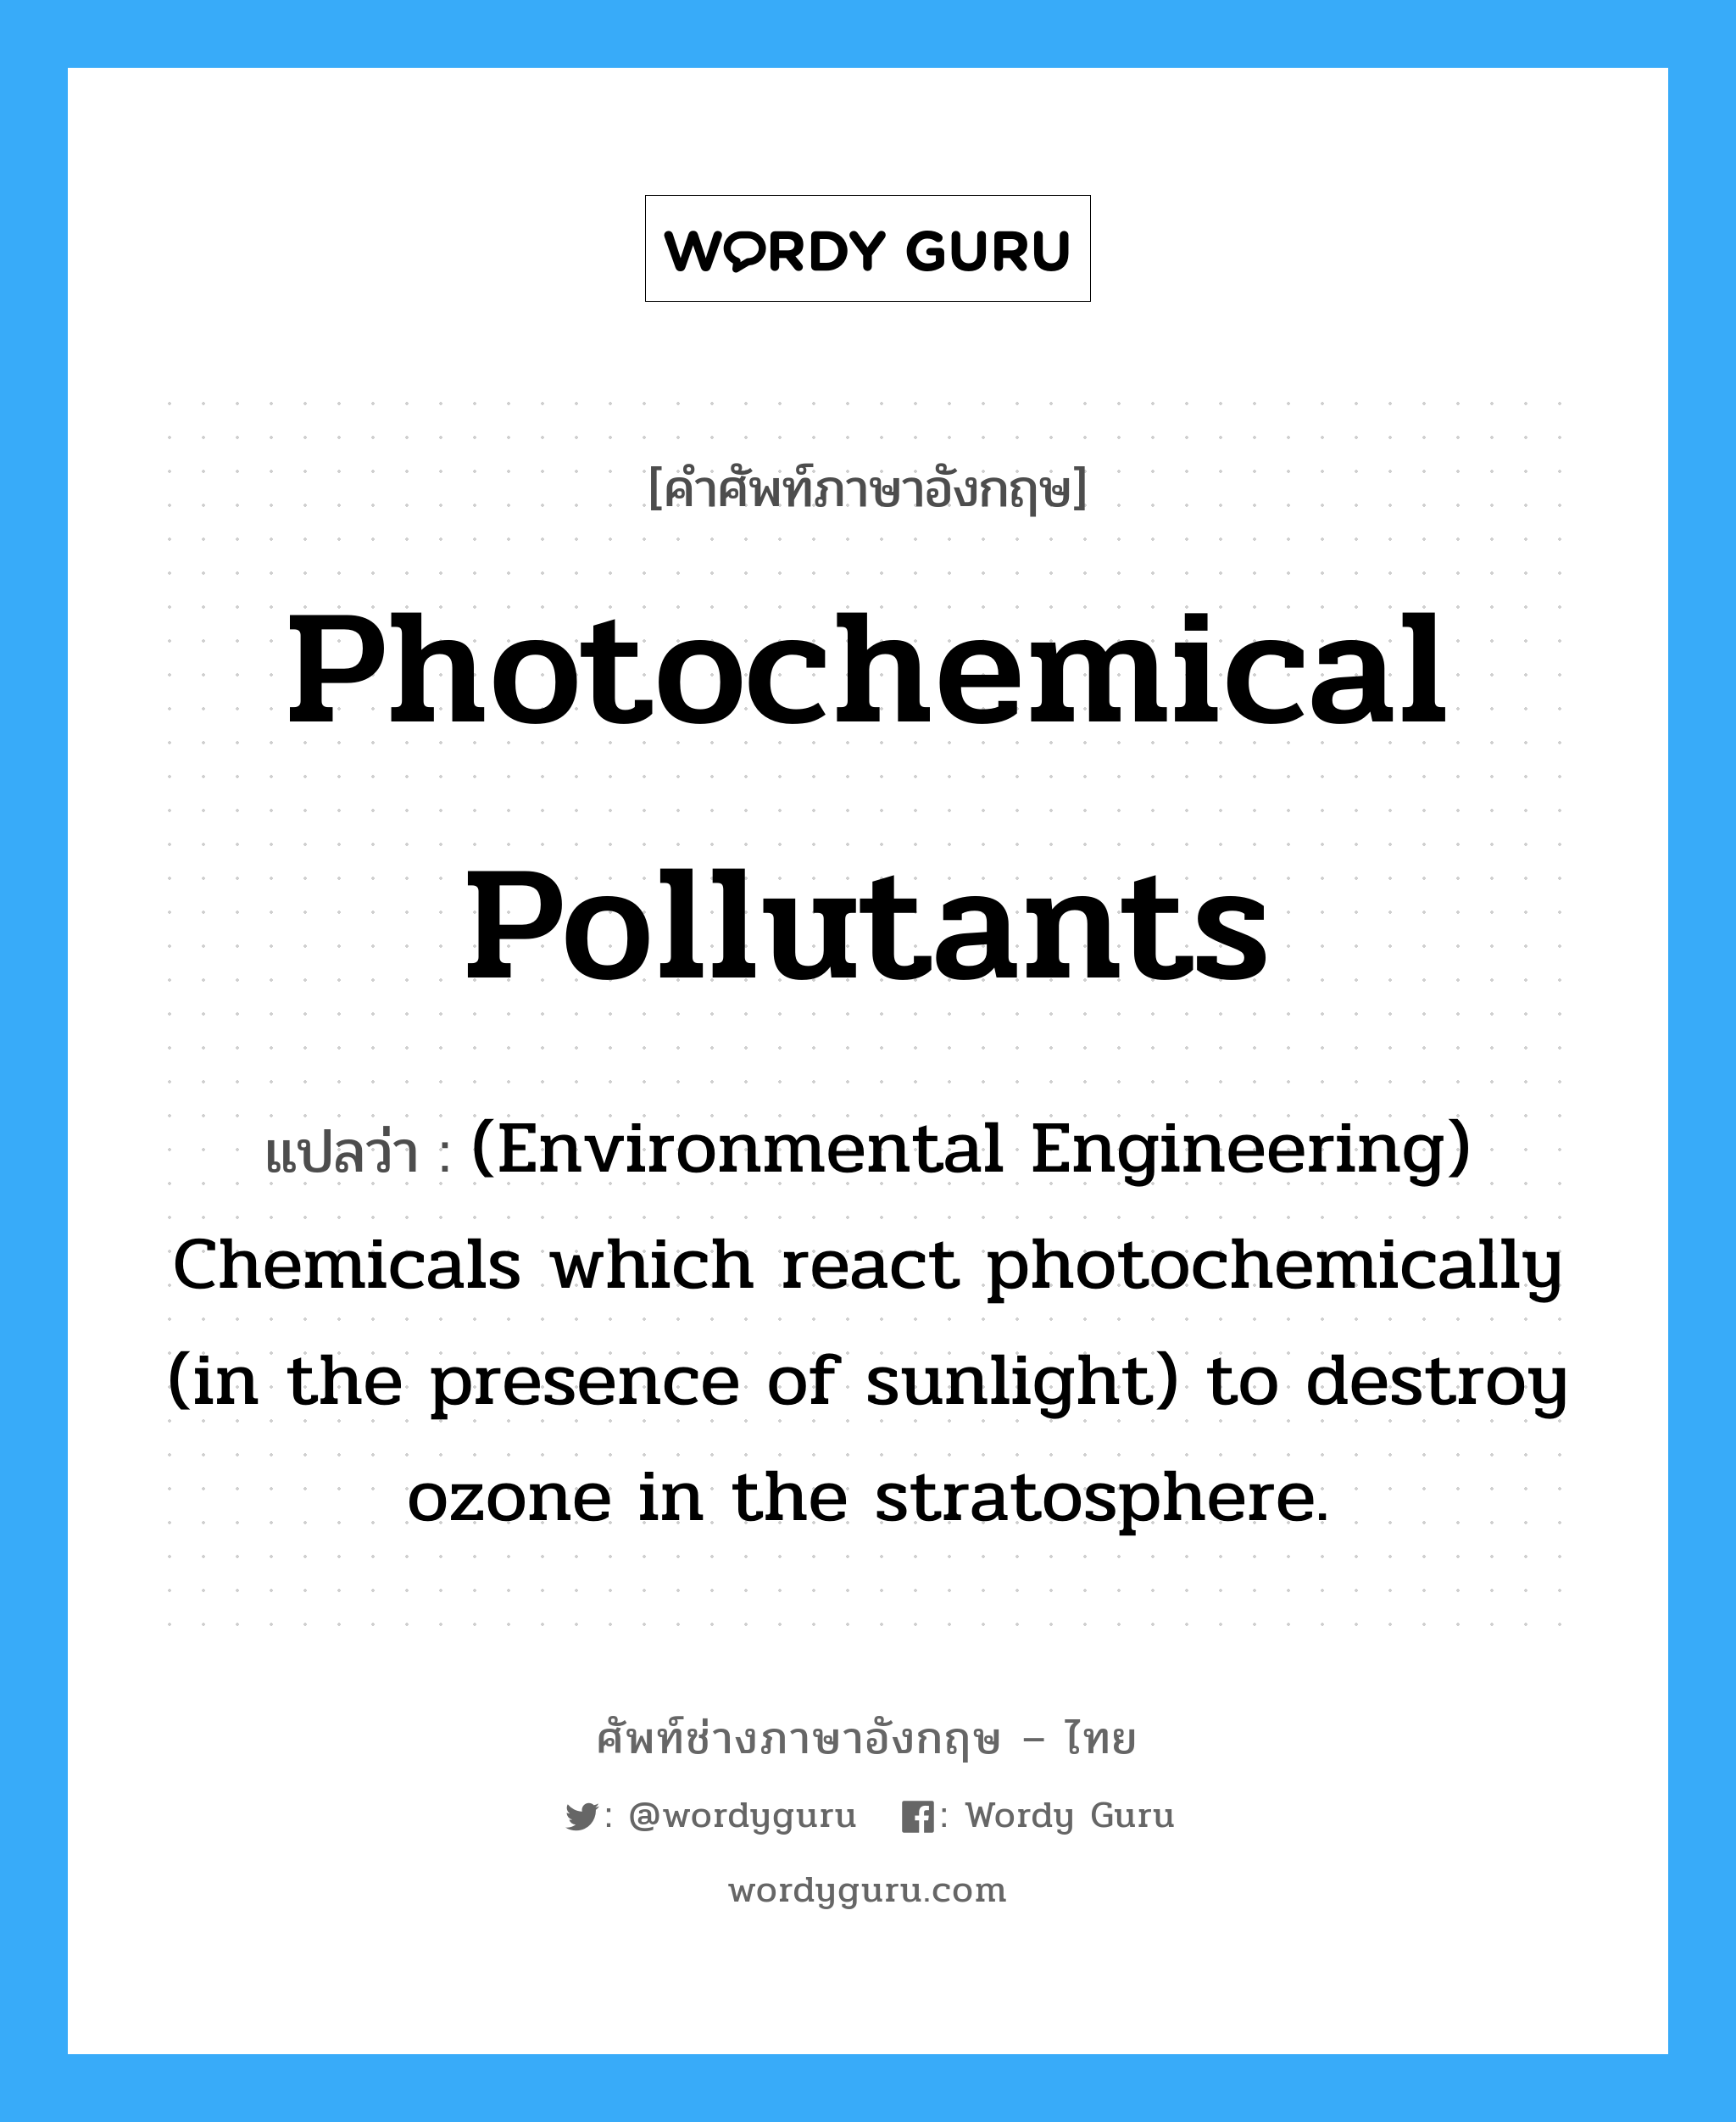 Photochemical pollutants แปลว่า?, คำศัพท์ช่างภาษาอังกฤษ - ไทย Photochemical pollutants คำศัพท์ภาษาอังกฤษ Photochemical pollutants แปลว่า (Environmental Engineering) Chemicals which react photochemically (in the presence of sunlight) to destroy ozone in the stratosphere.